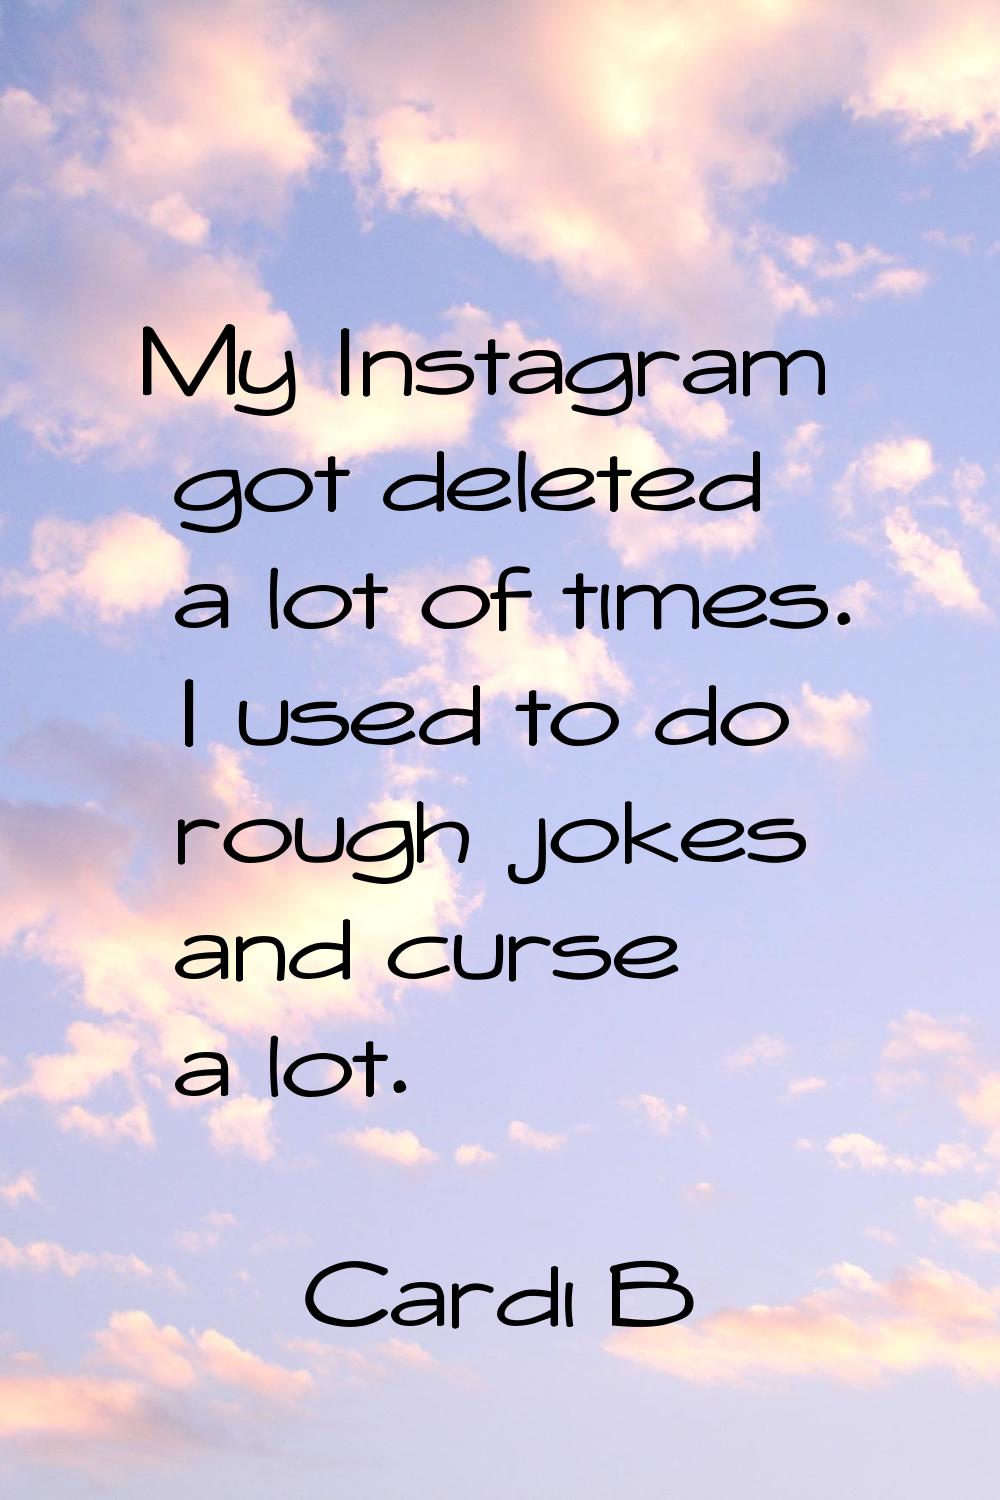 My Instagram got deleted a lot of times. I used to do rough jokes and curse a lot.